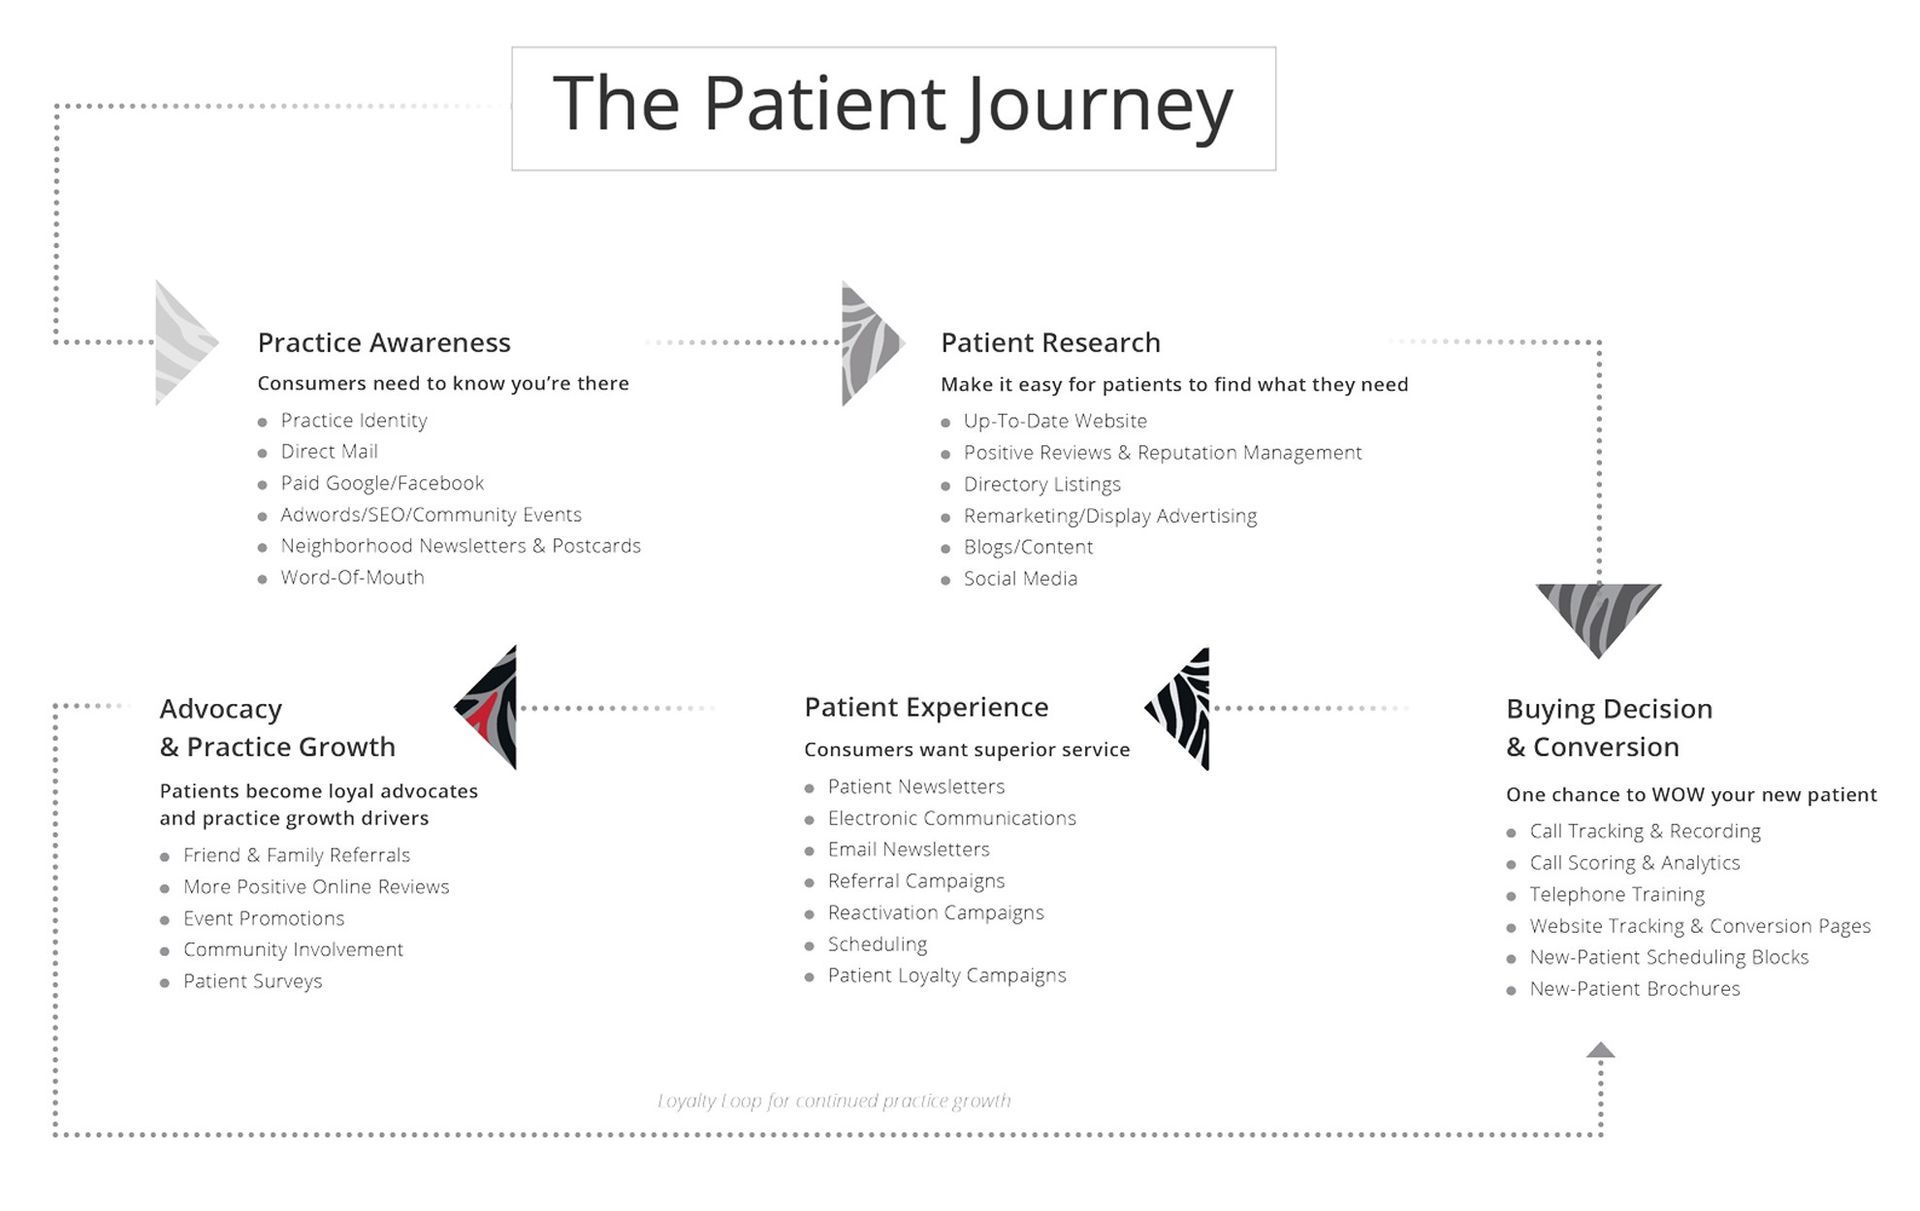 A diagram of the patient journey with arrows pointing in different directions.